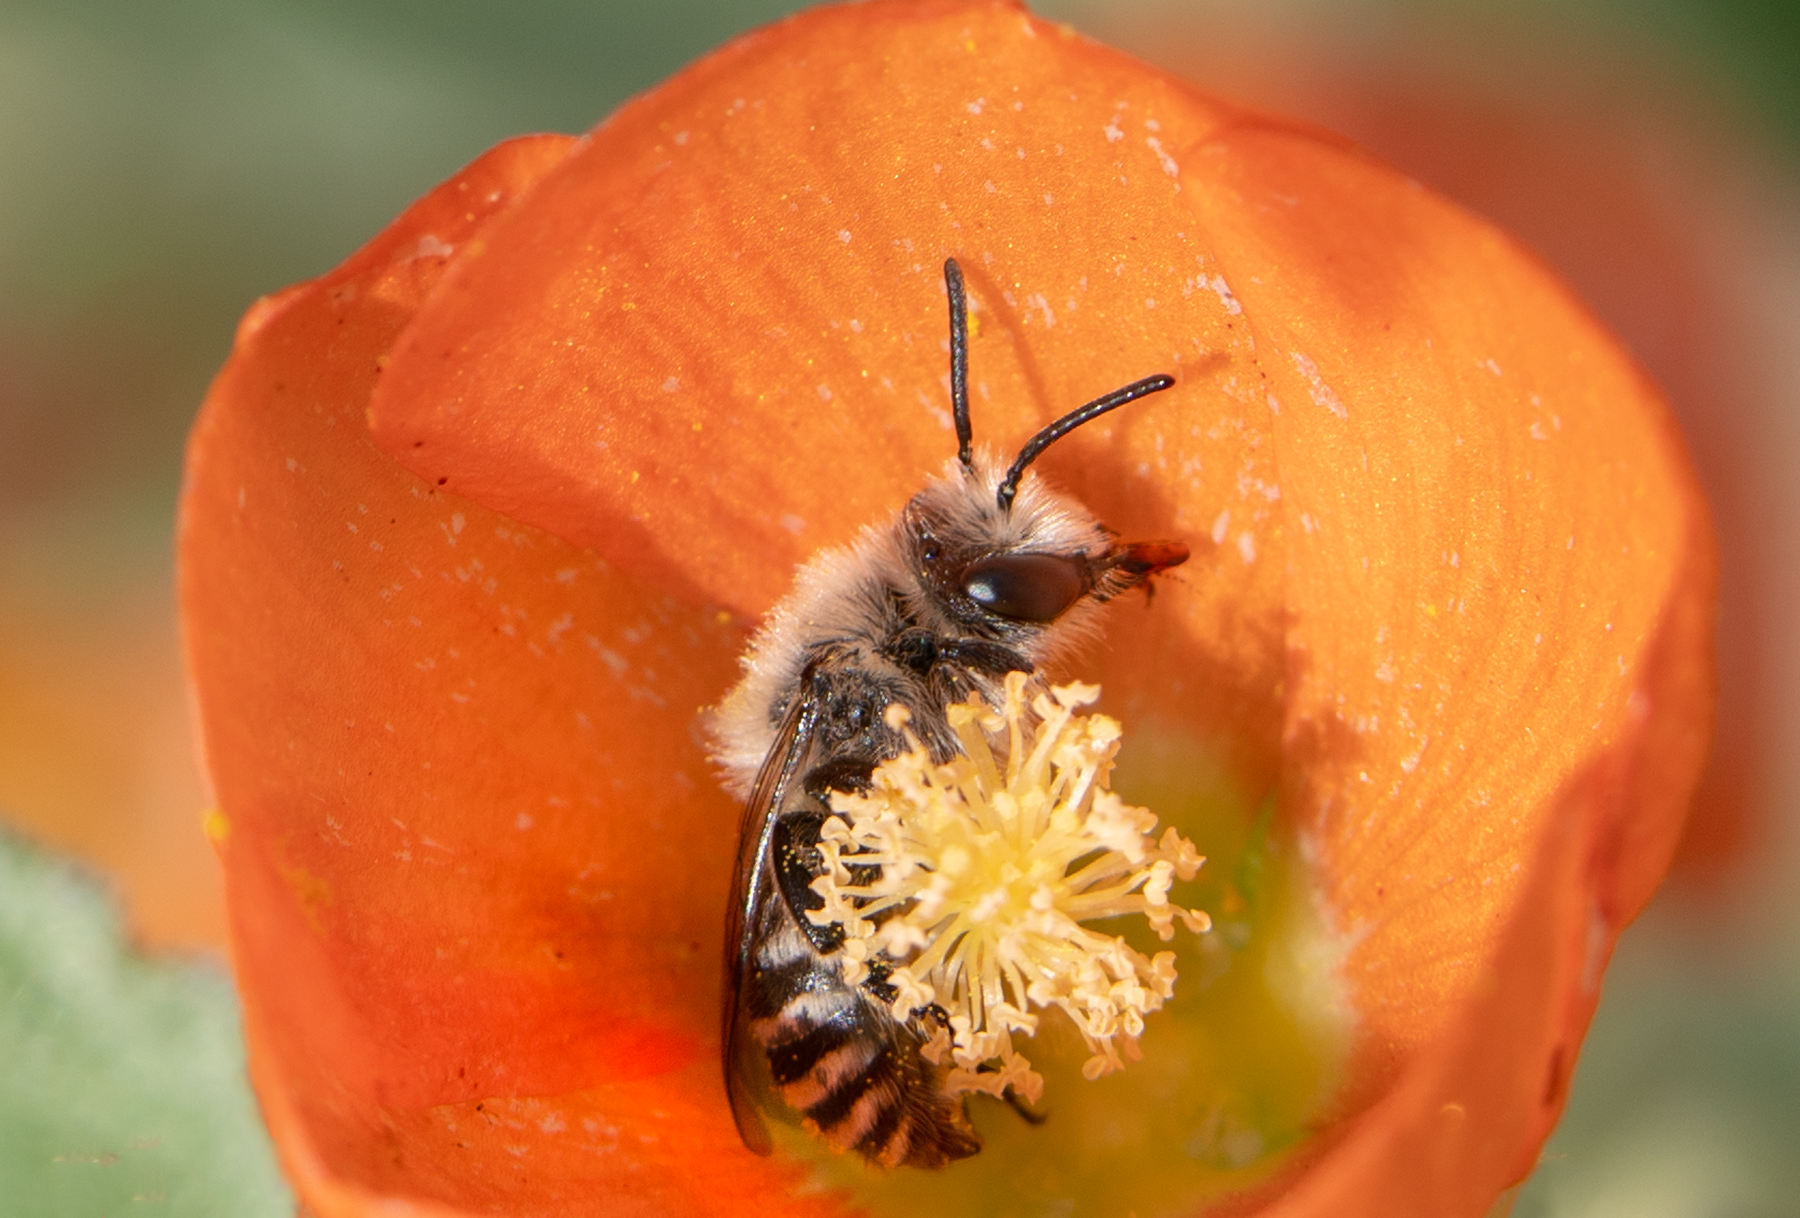 polyester bee cellophane bee globe mallow flower